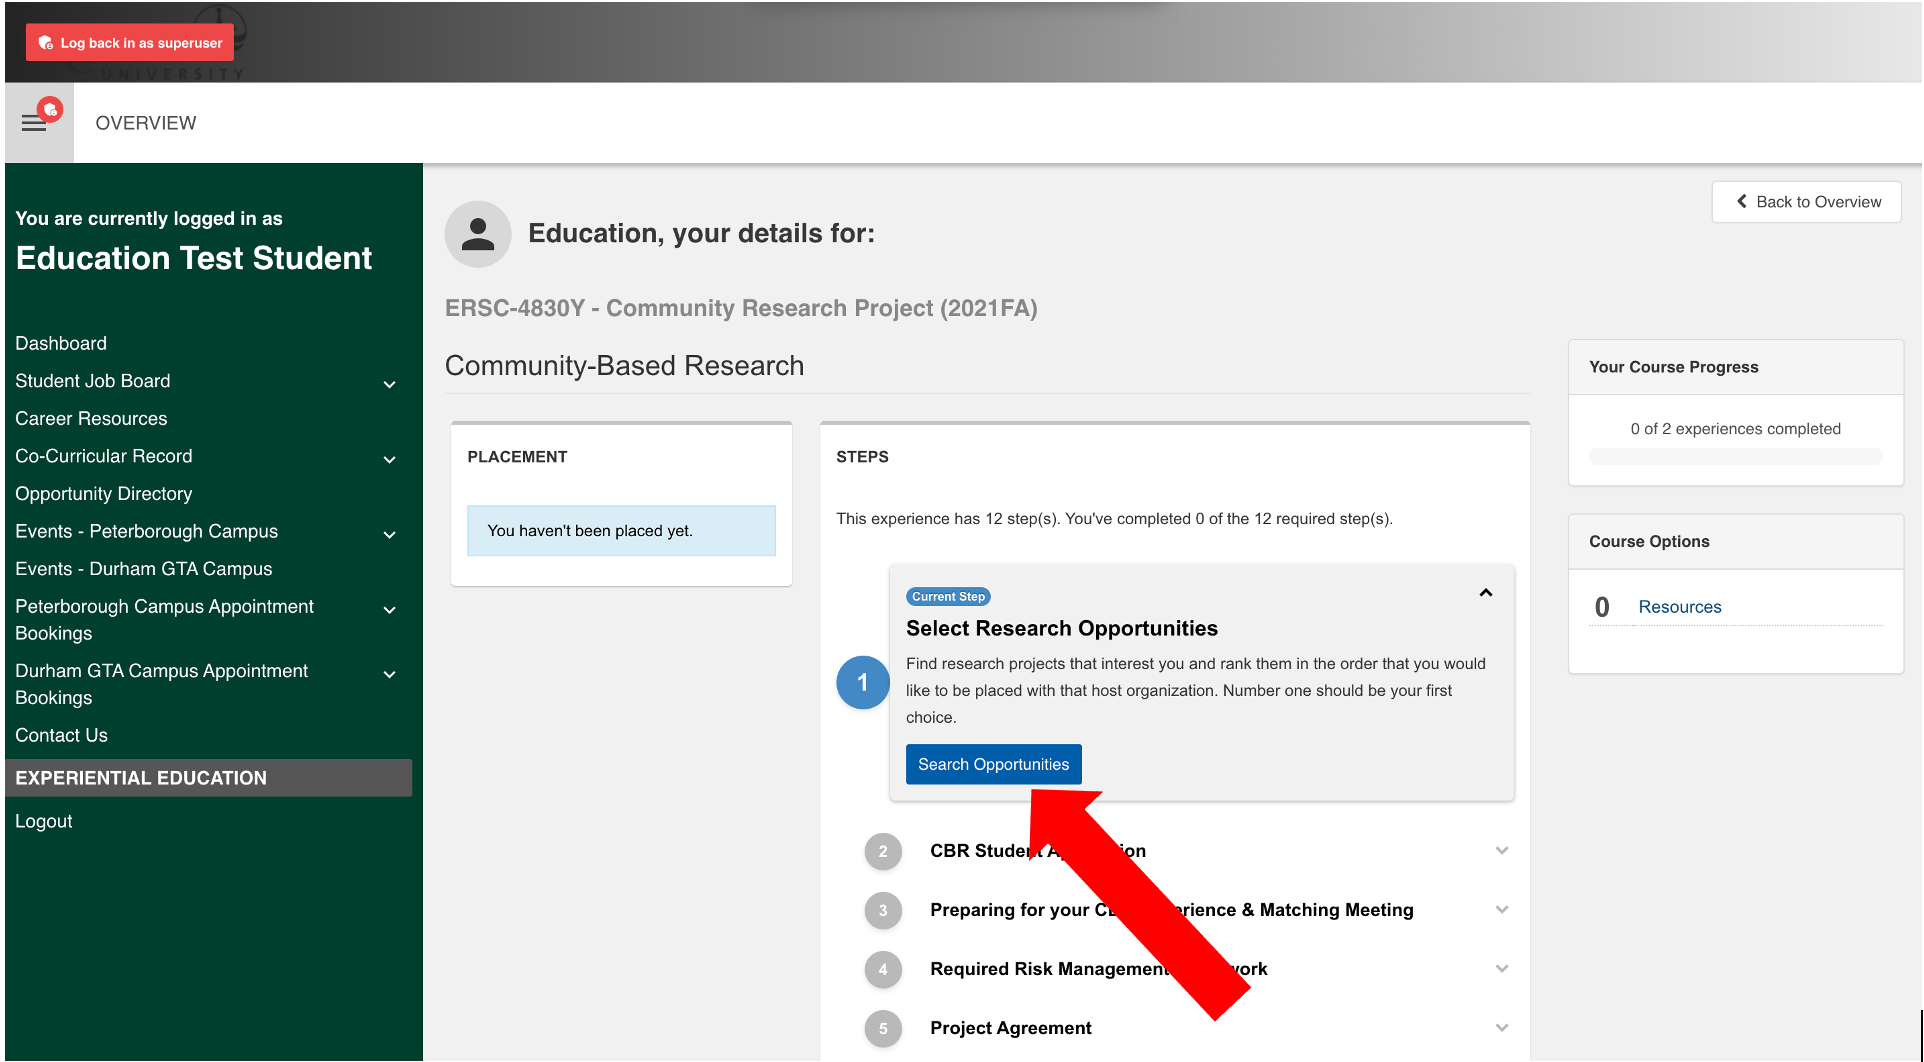 Screenshot of the CBR course from student view. The student is on Step 1: Select Research Opportunities. There is a red arrow pointing to "Search Opportunities".